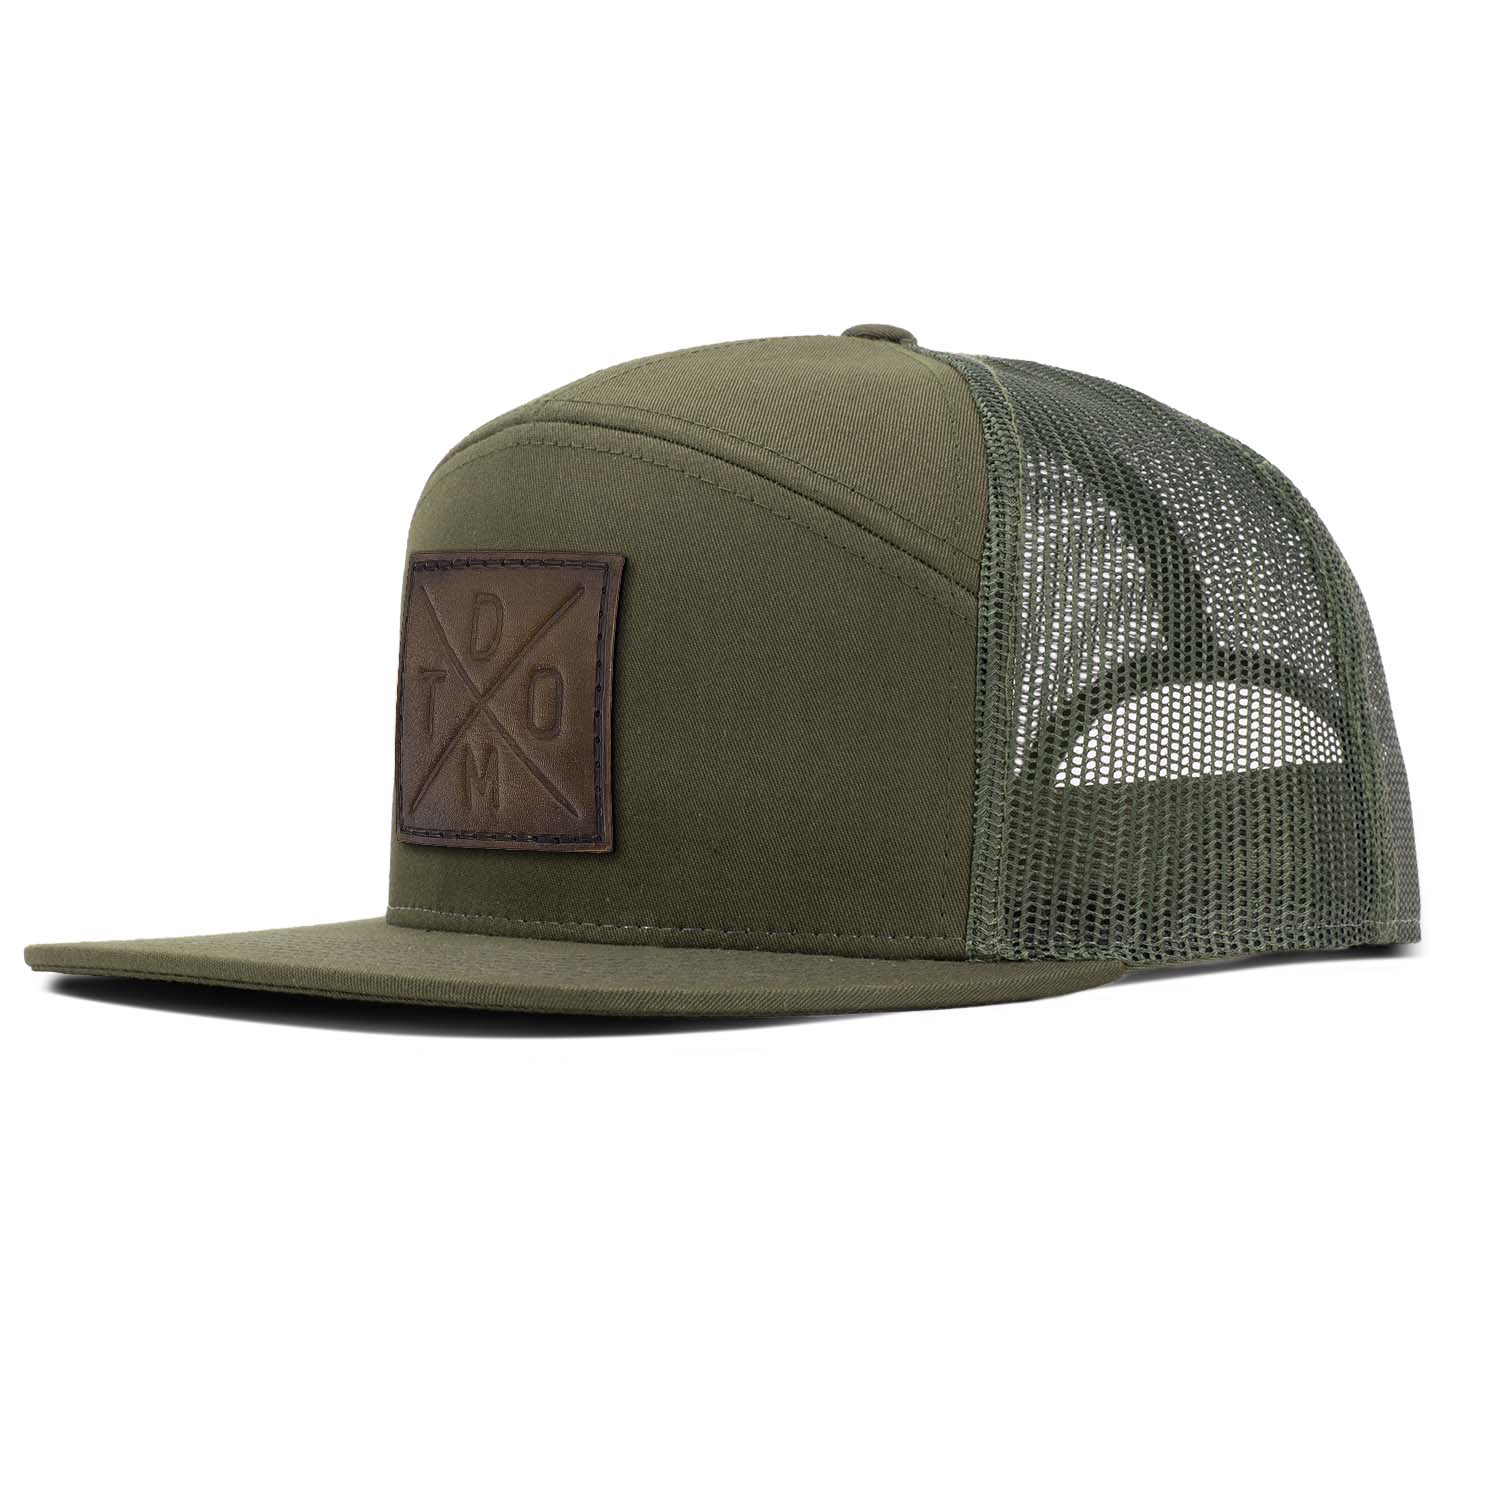 Revolution Mfg dark loden with loden mesh 7 panel trucker featuring our original DTOM debossed full grain leather patch.